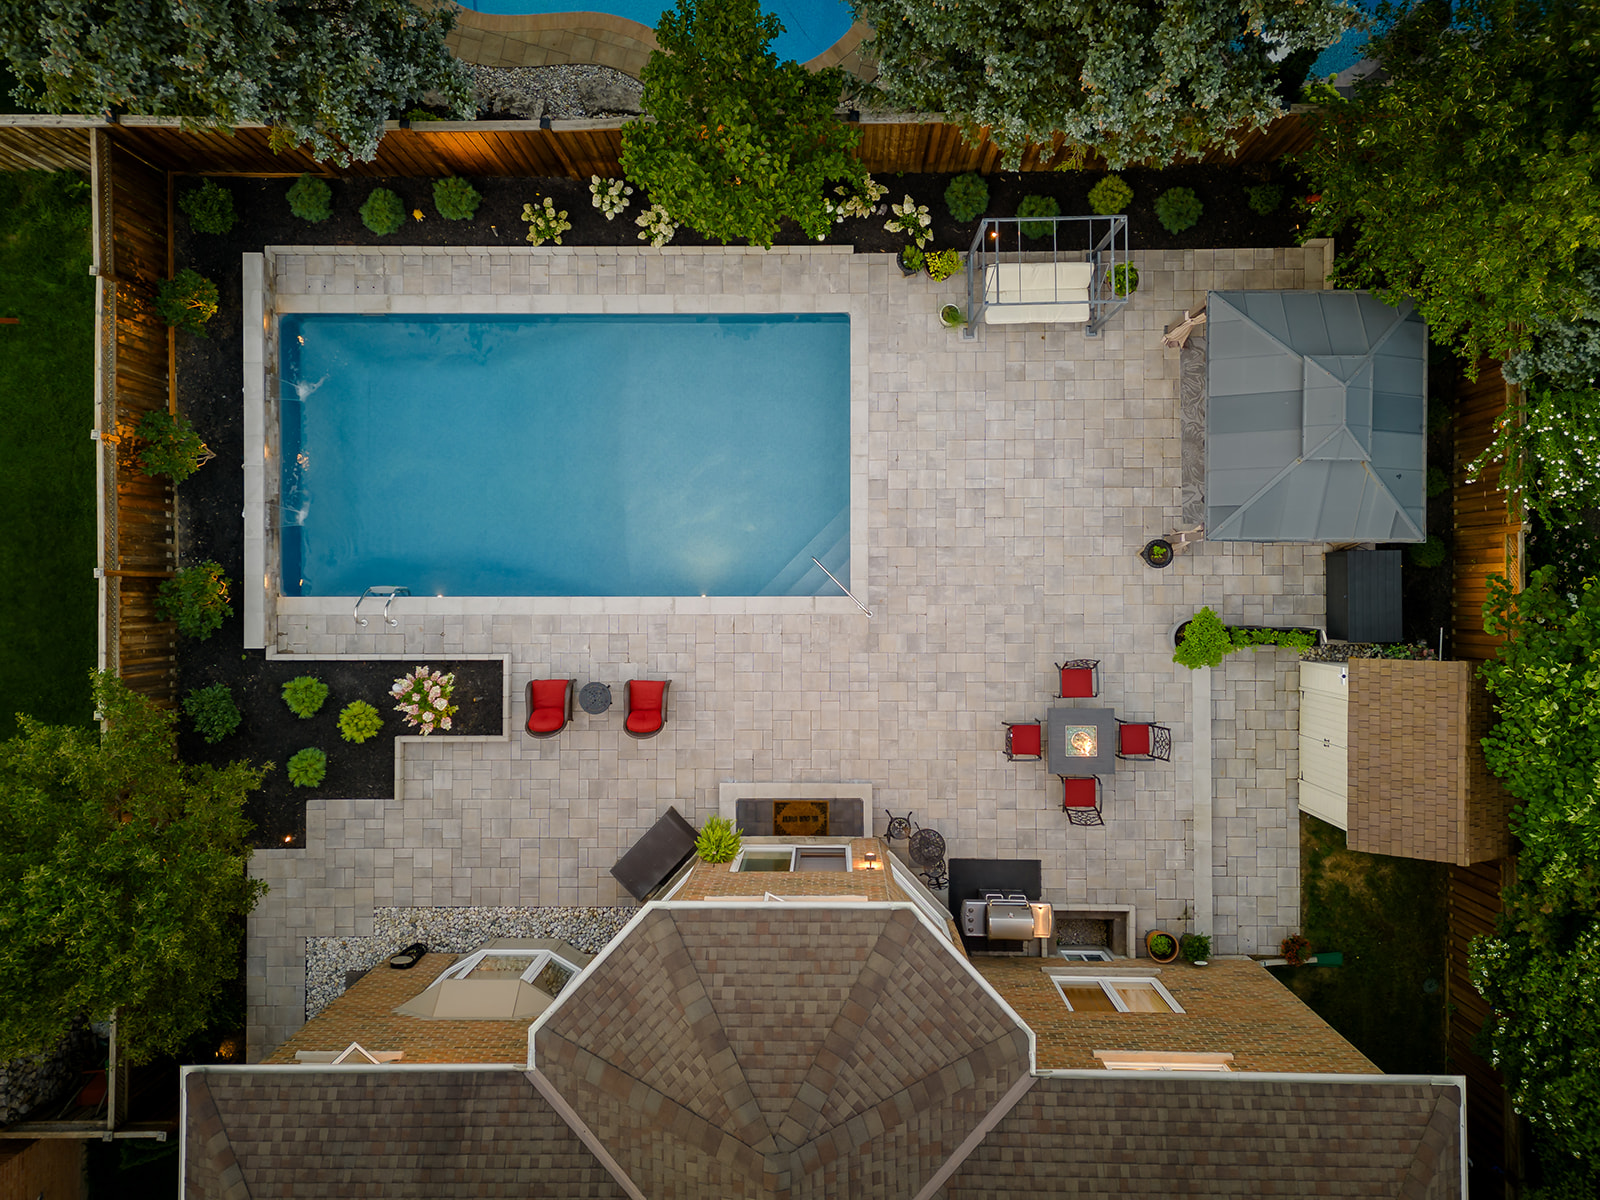 A top-down view of an inground pool and furniture.